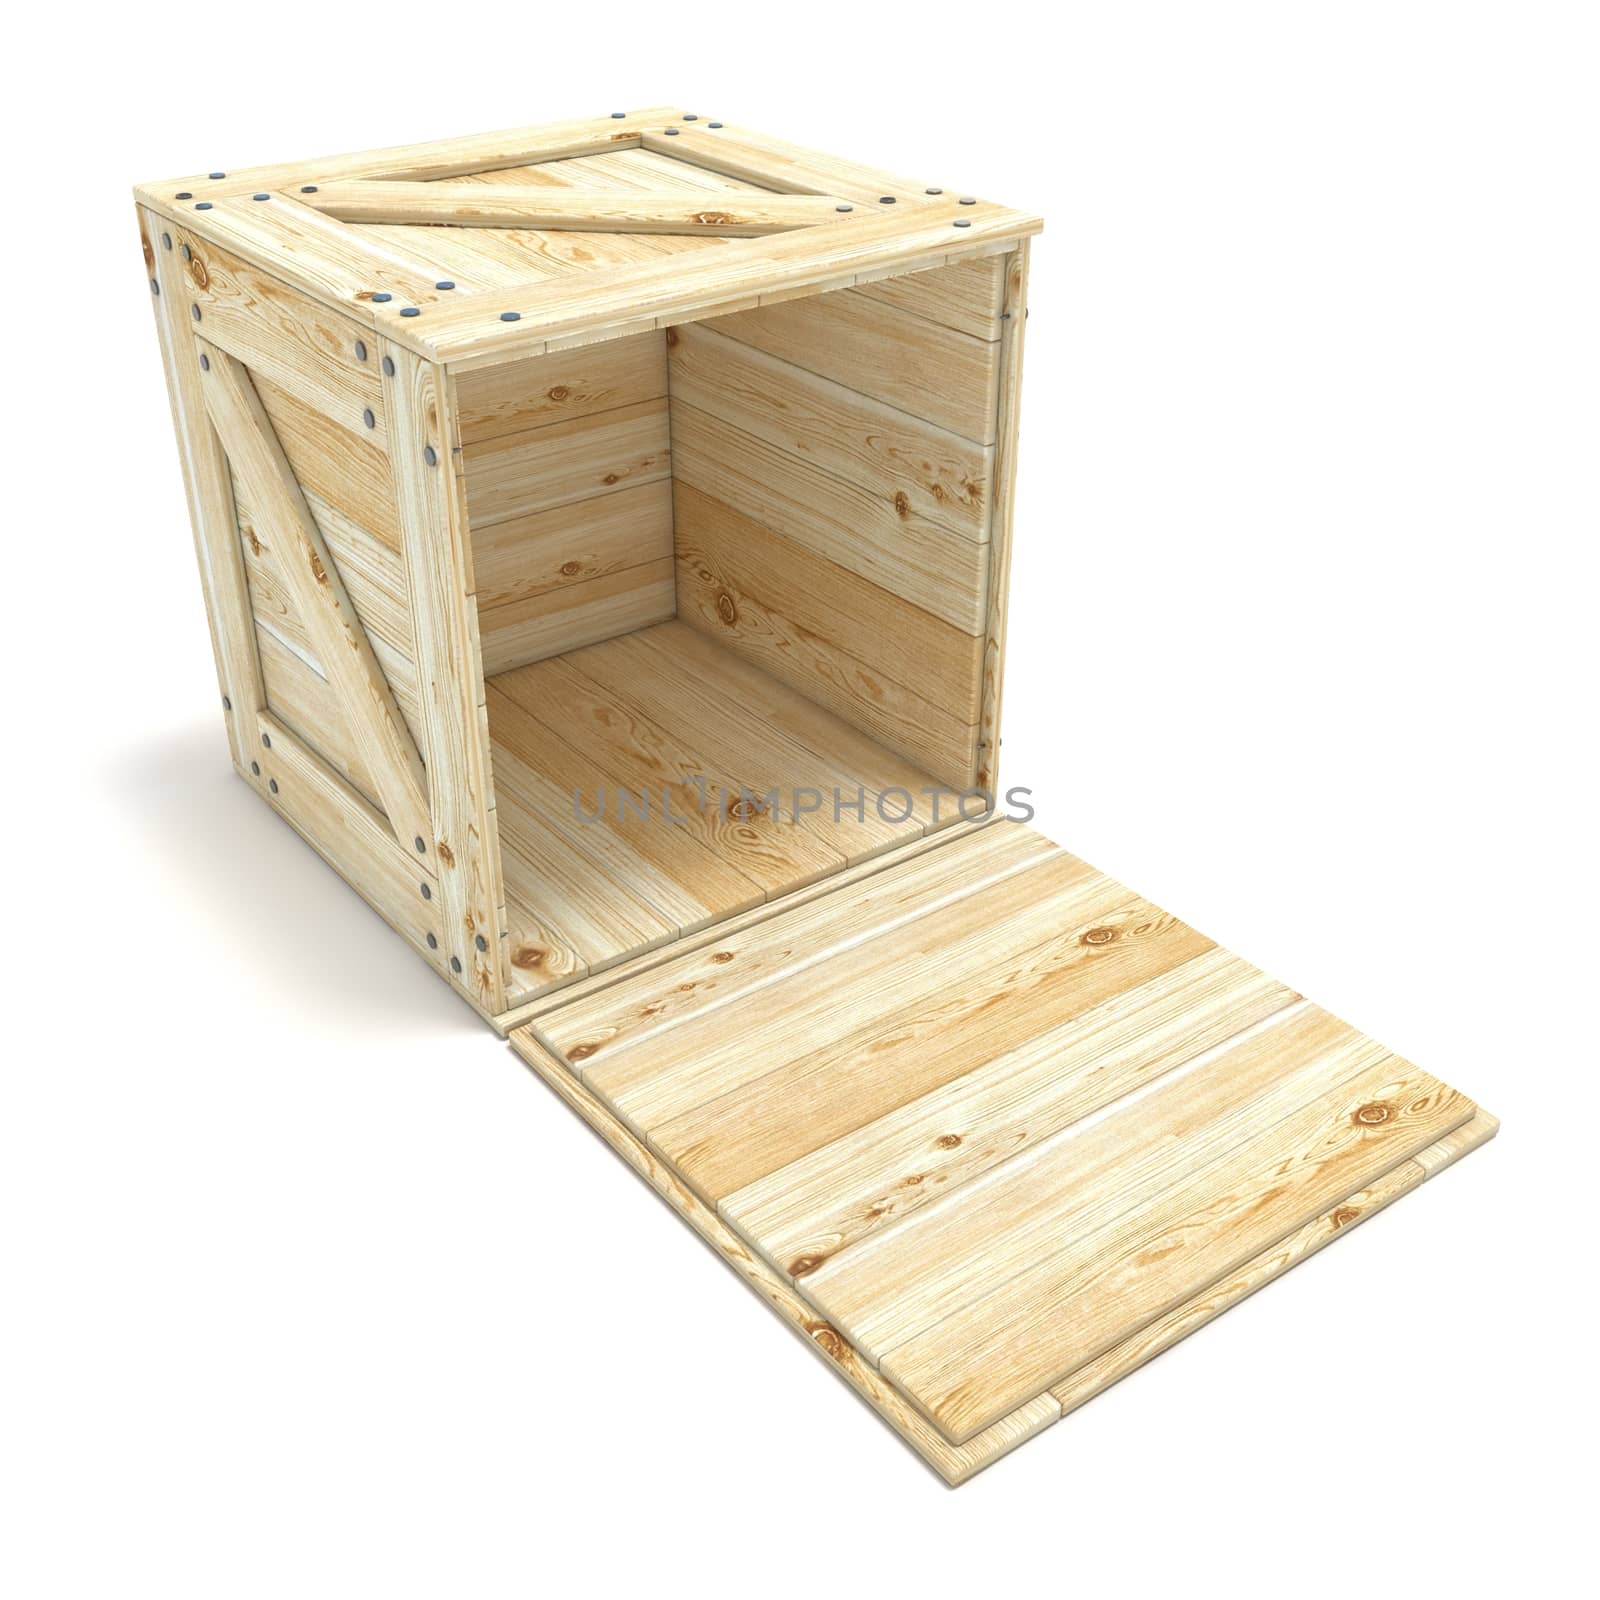 Open wooden box. 3D render illustration isolated on white background